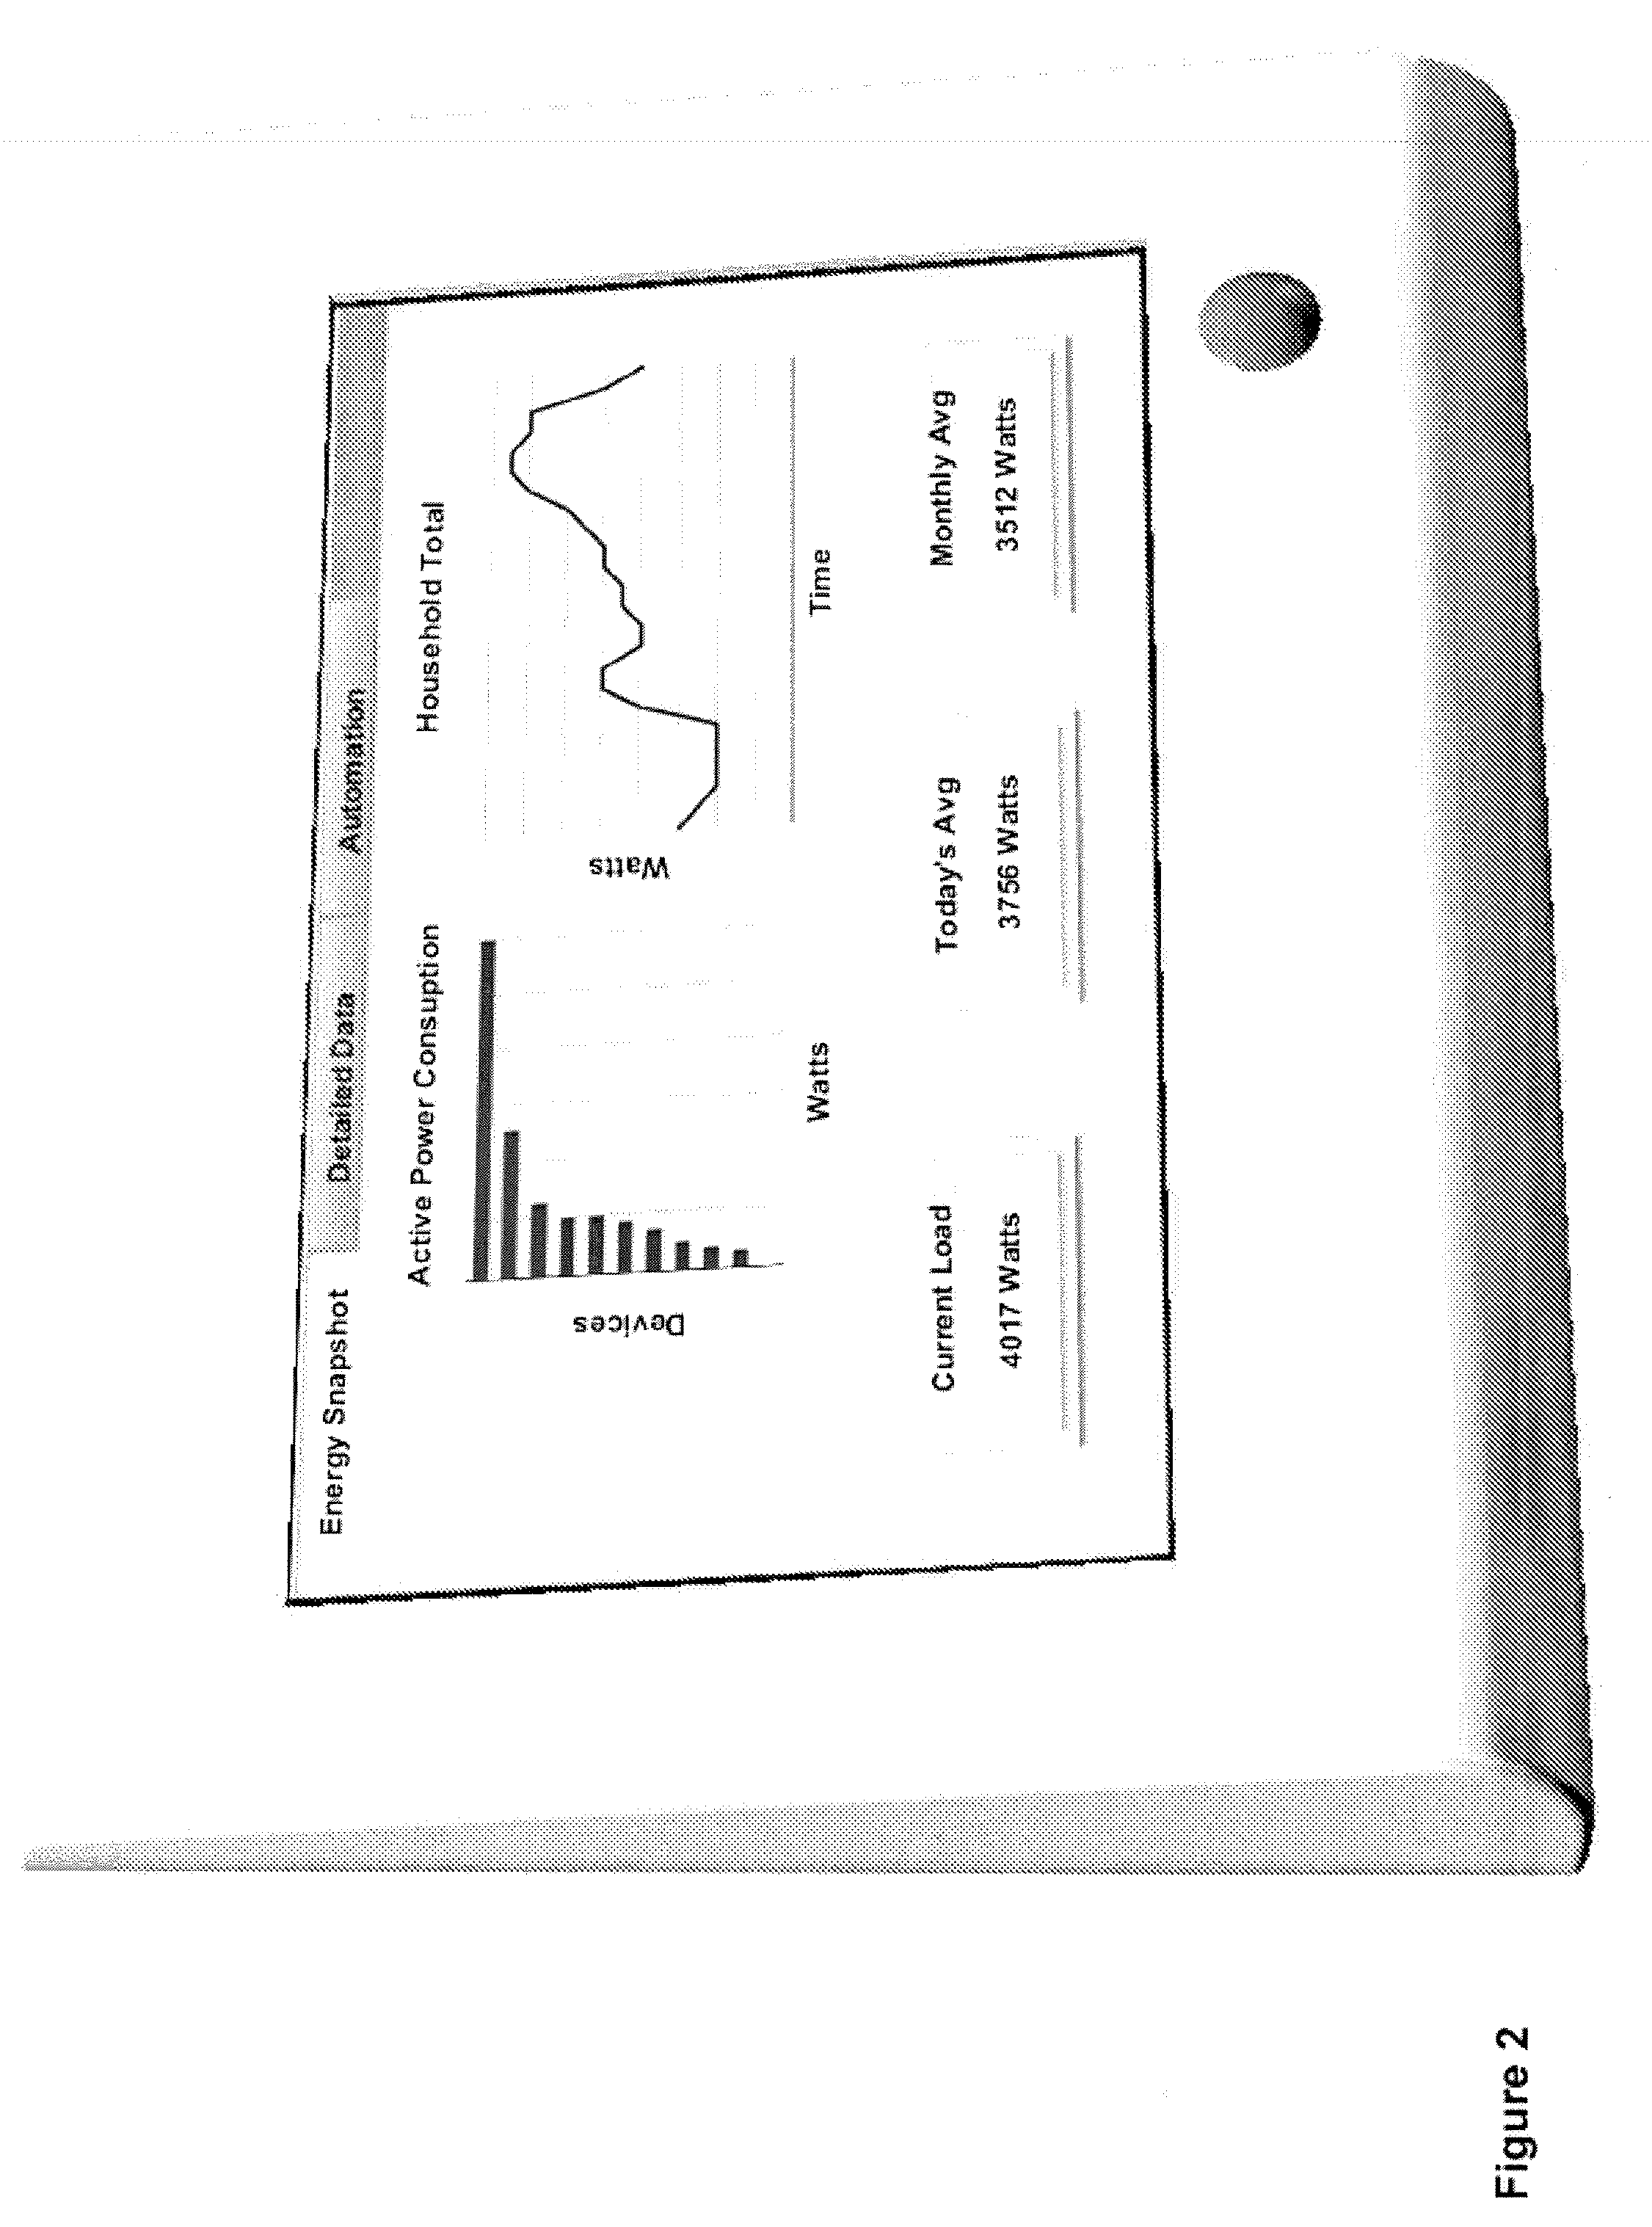 System and method for home energy monitor and control